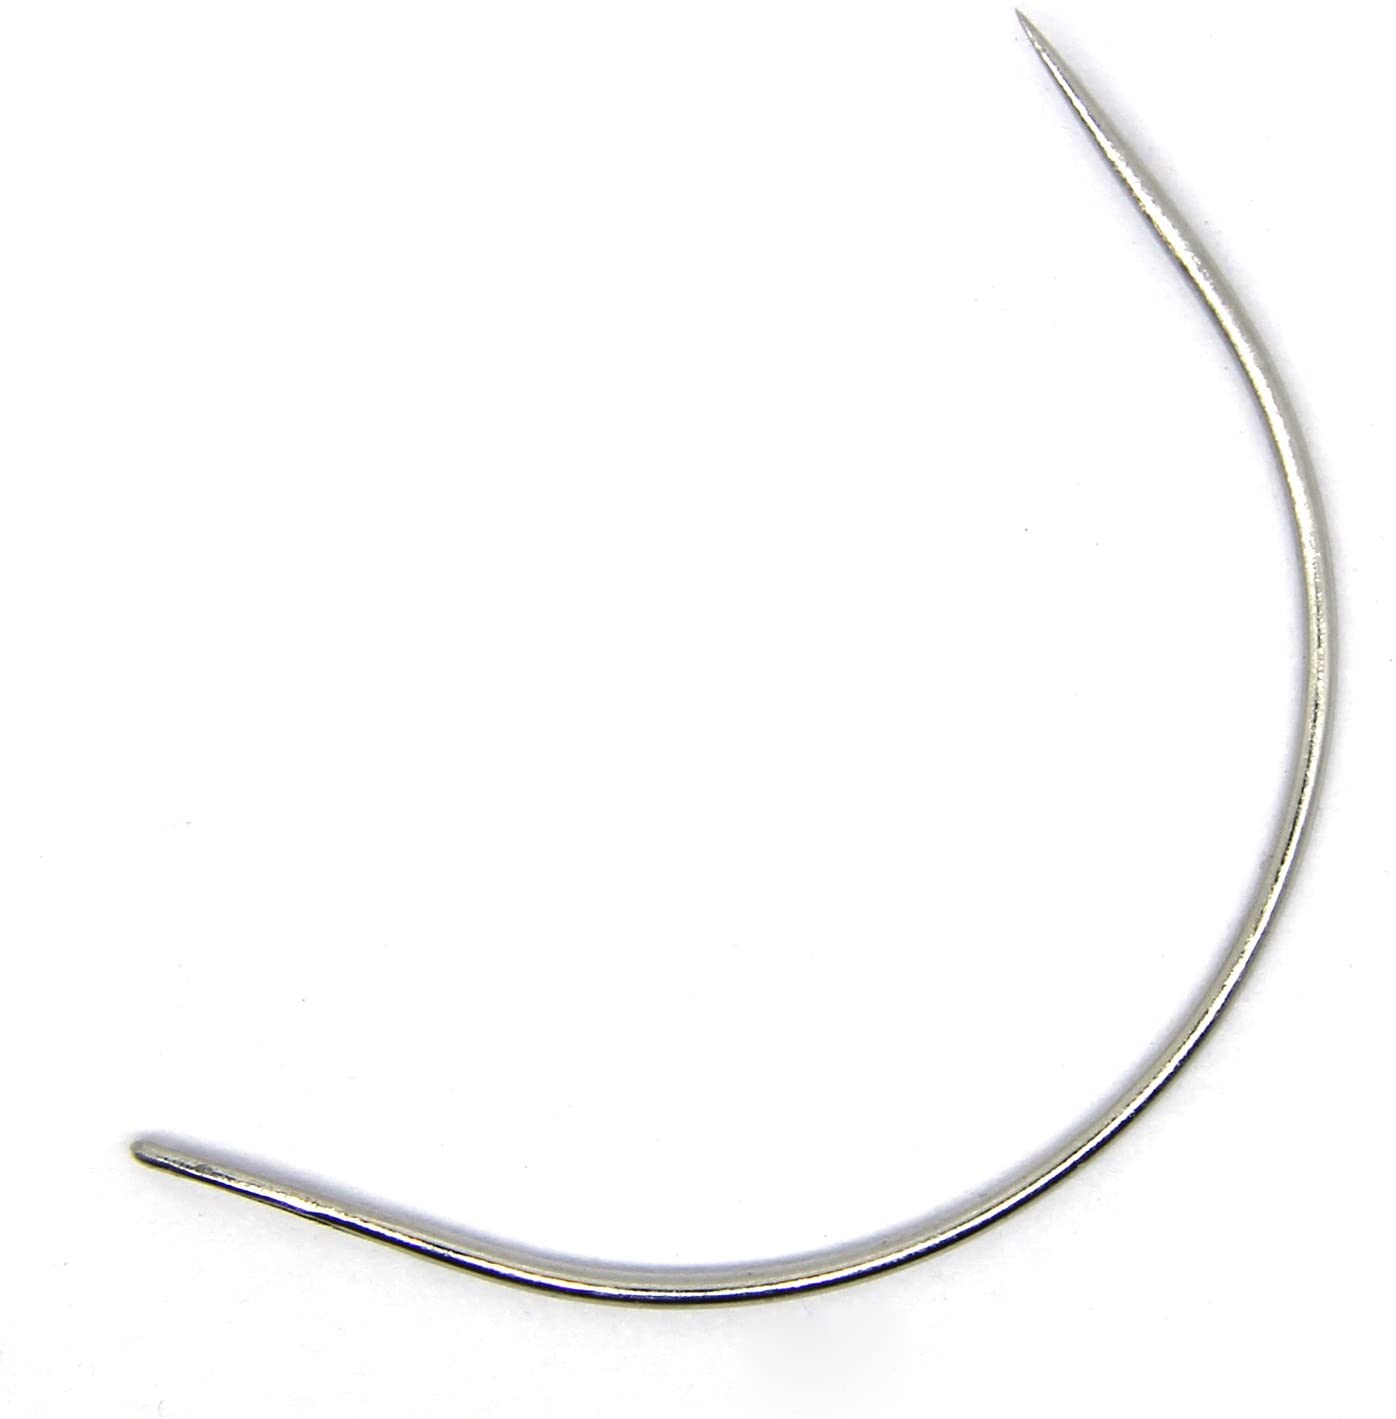 CURVED NEEDLE 2pcs Pack